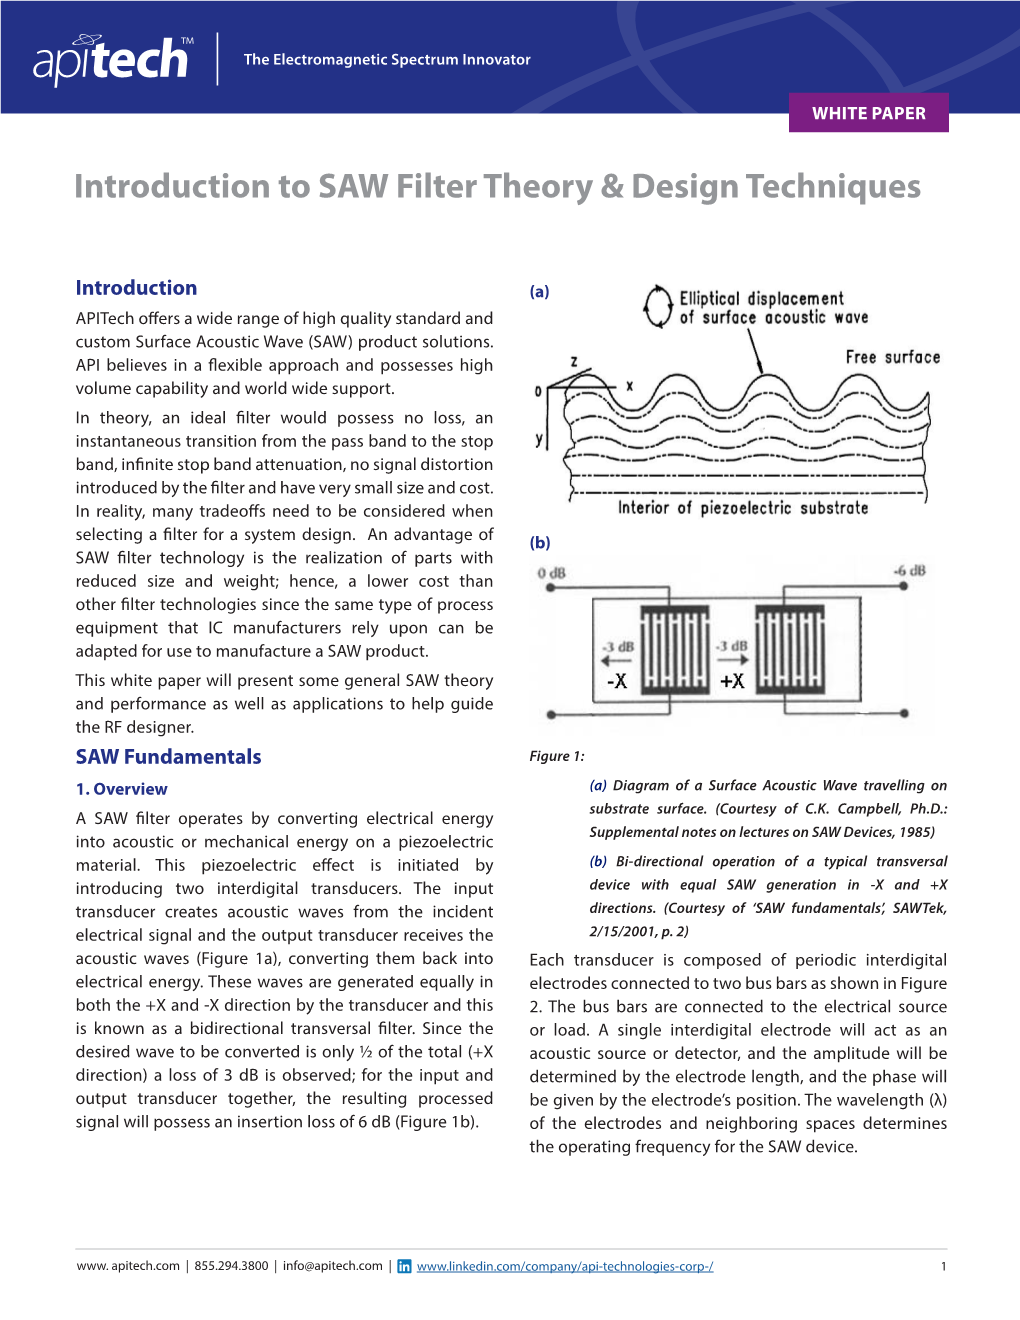 Introduction to SAW Filter Theory & Design Techniques